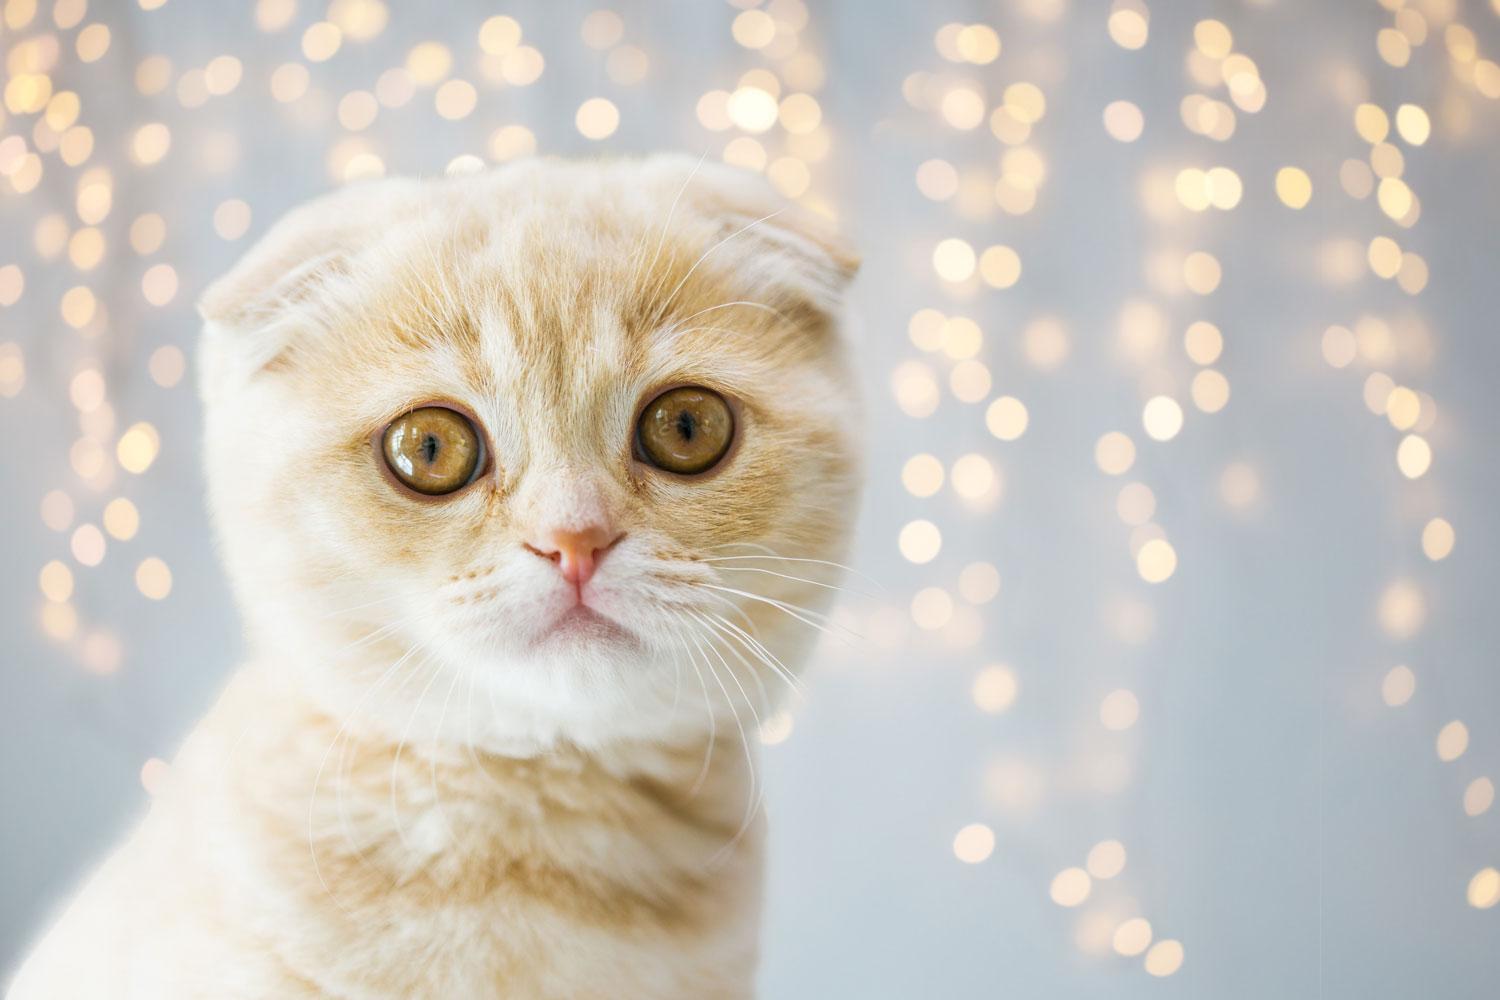 An up close photo of a Scottish Fold cat starring at the camera